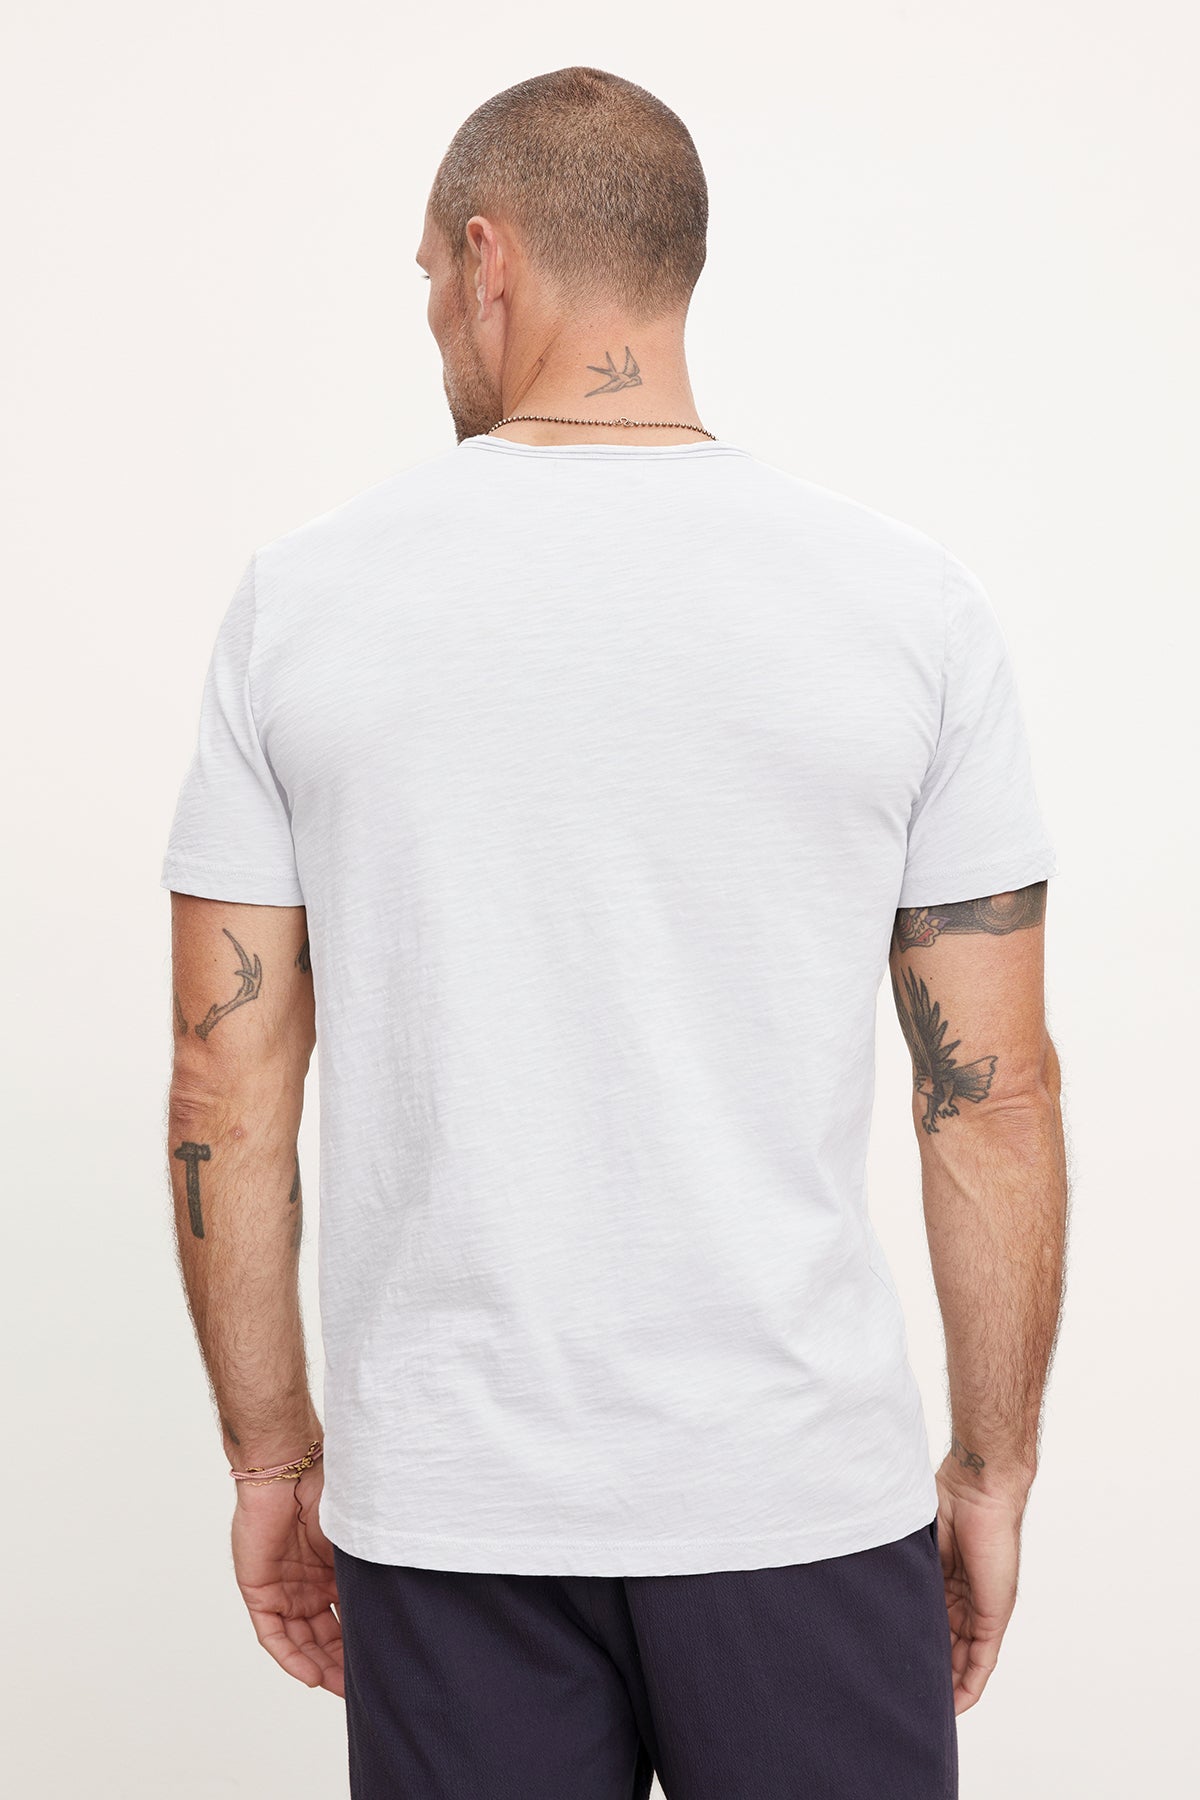   A man viewed from behind, wearing a white CHAD TEE with raw-edge details by Velvet by Graham & Spencer and navy pants, showcasing tattoos on his arms and a neck tattoo. 